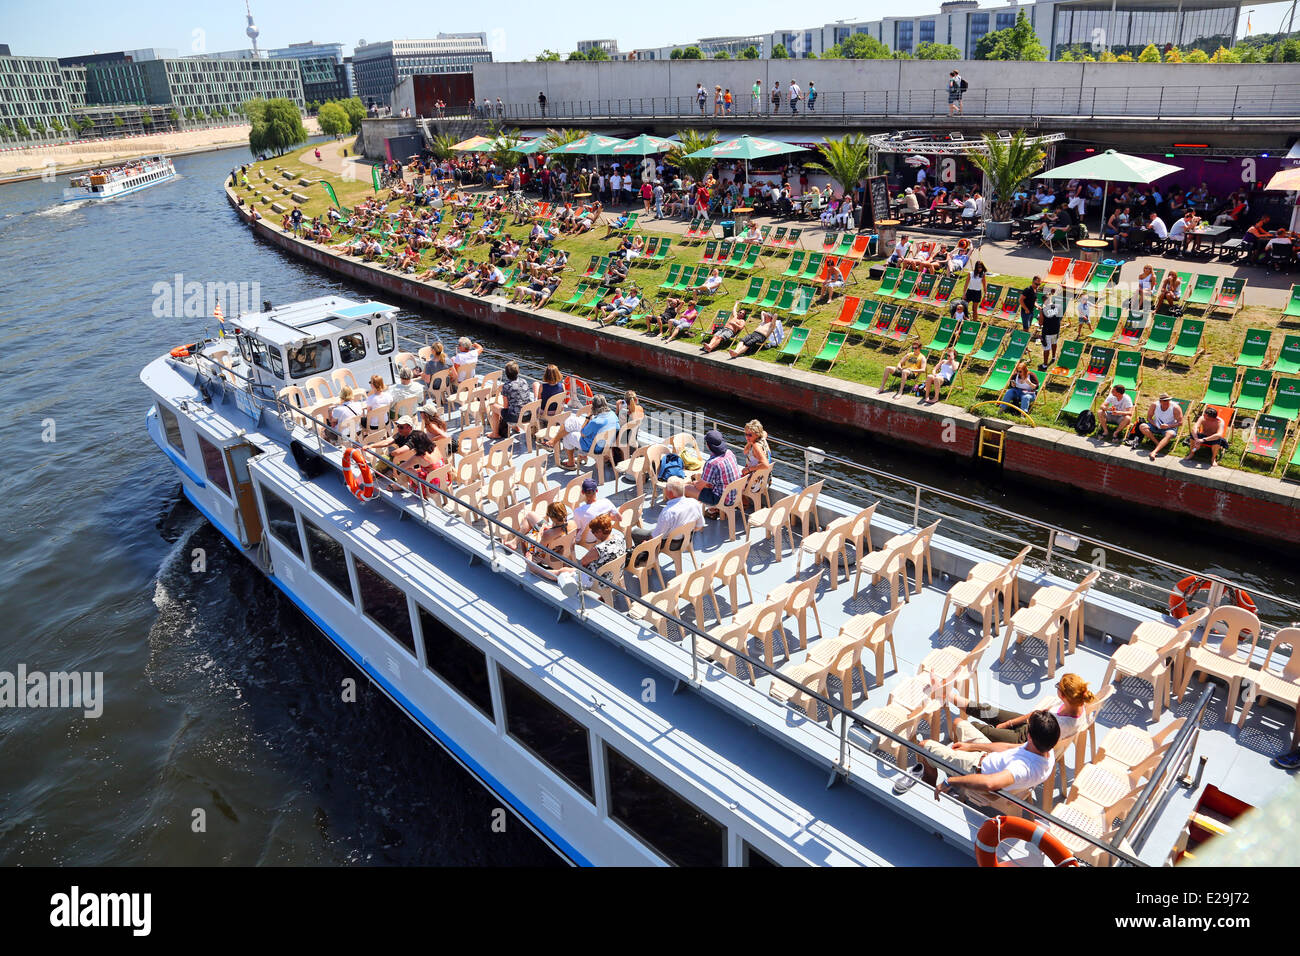 Artificial beach with deckchairs beside the River Spree with a tourist sightseeing boat in Berlin, Germany Stock Photo